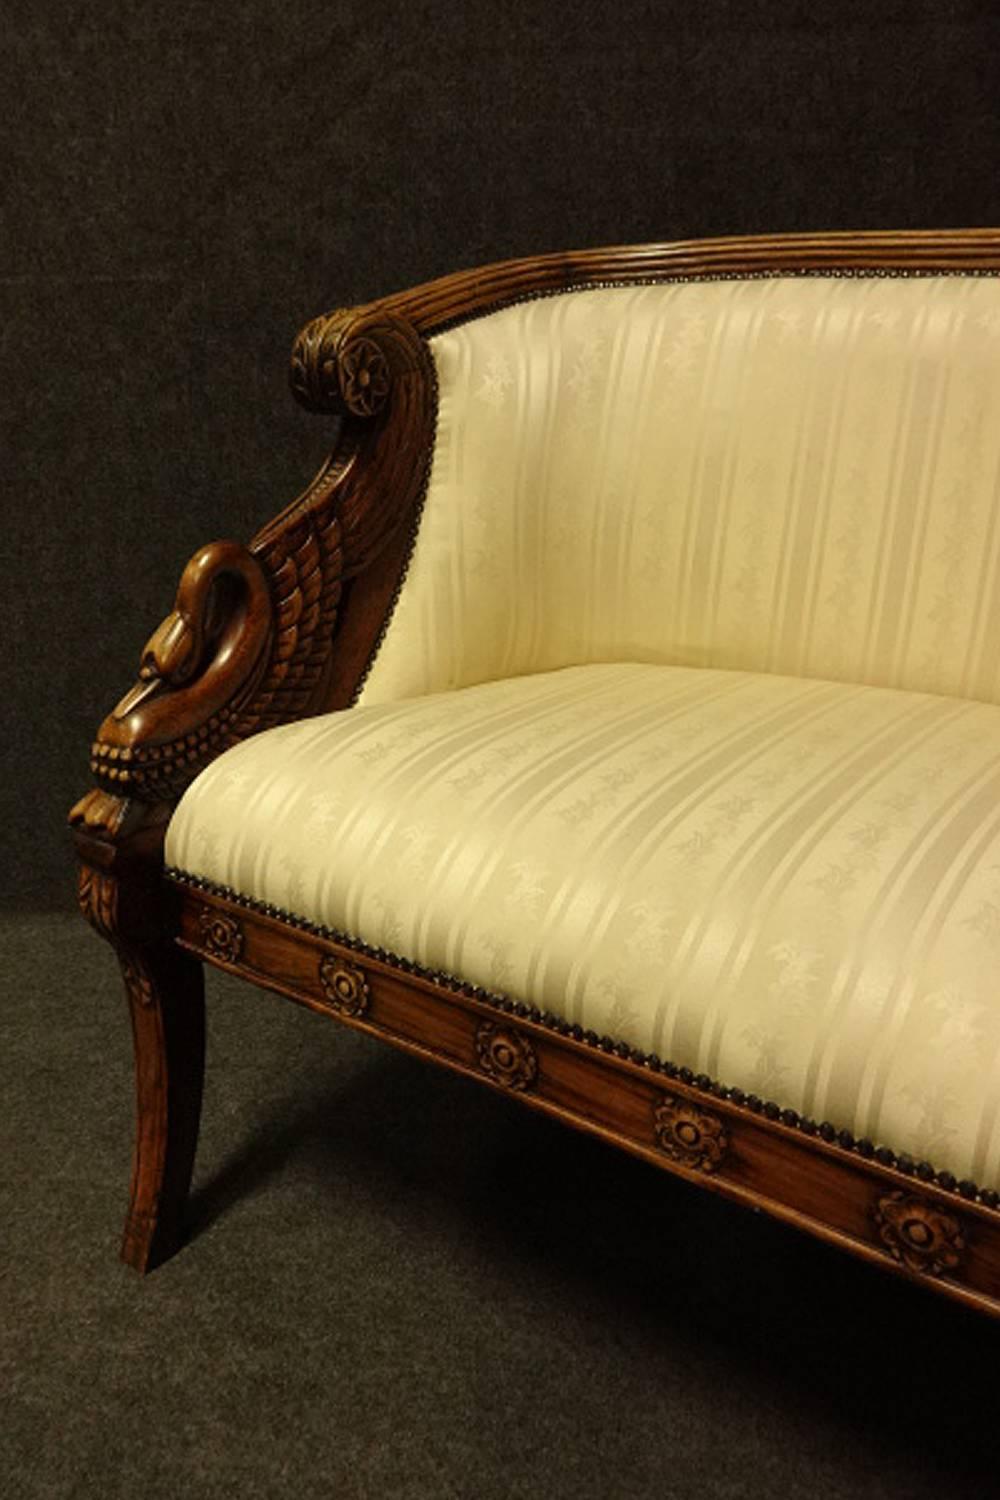 An outstanding curved framed mahogany sofa, with winged bird Egyptian influence,
reeded frame with some bleaching, lozenge shapes to frame base, lovely color and condition.